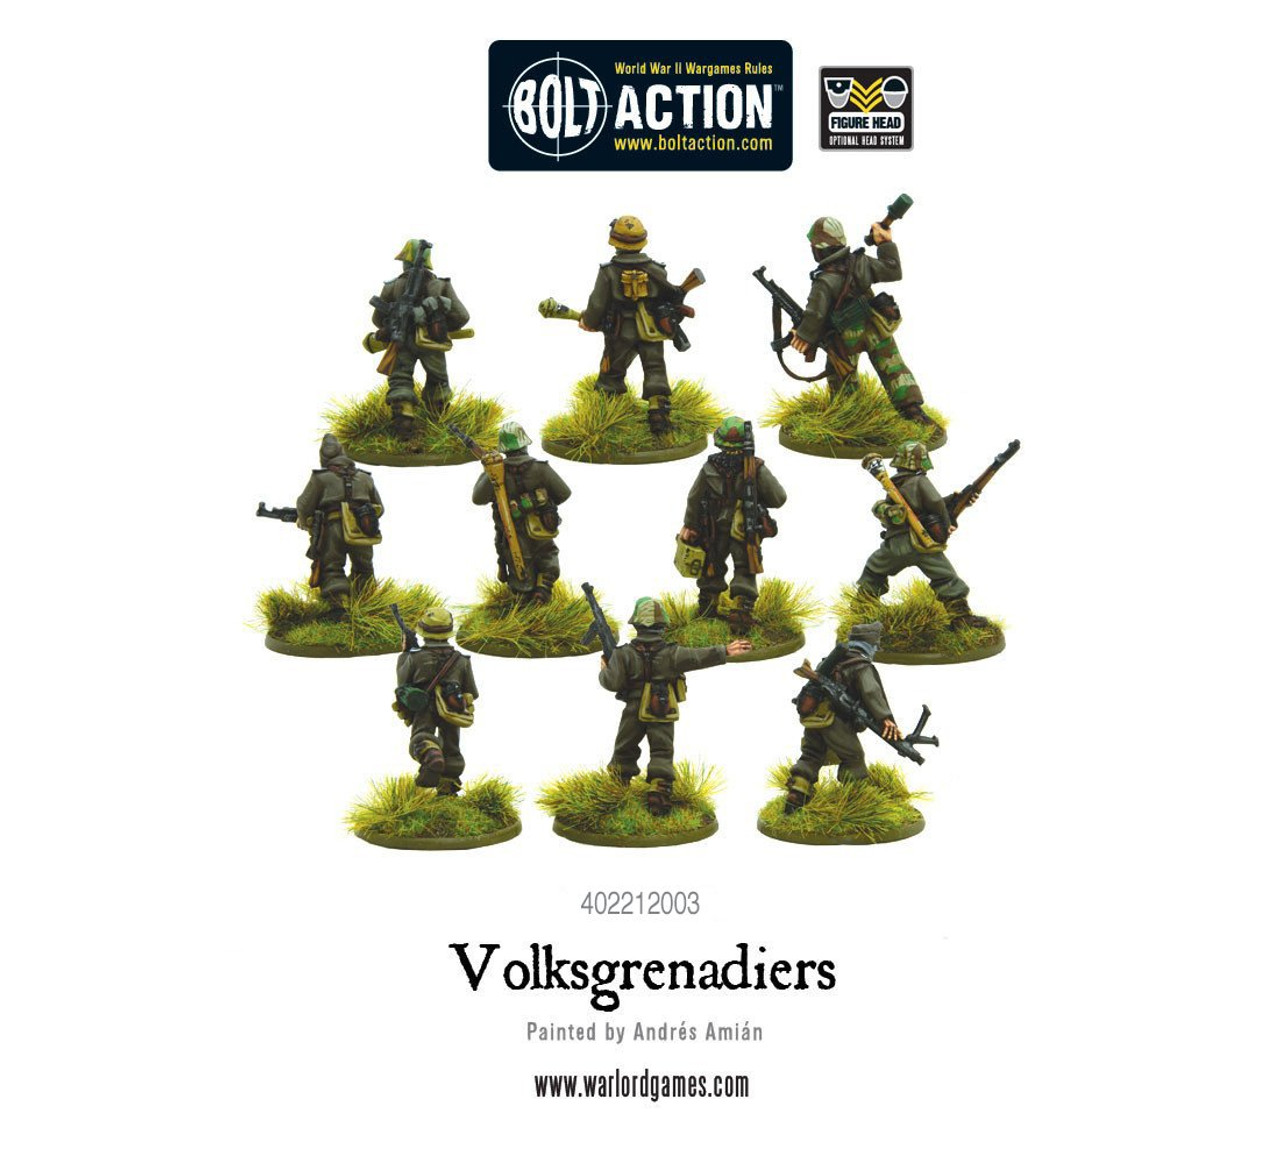 Waffen SS Starter Army – Warlord Games US & ROW